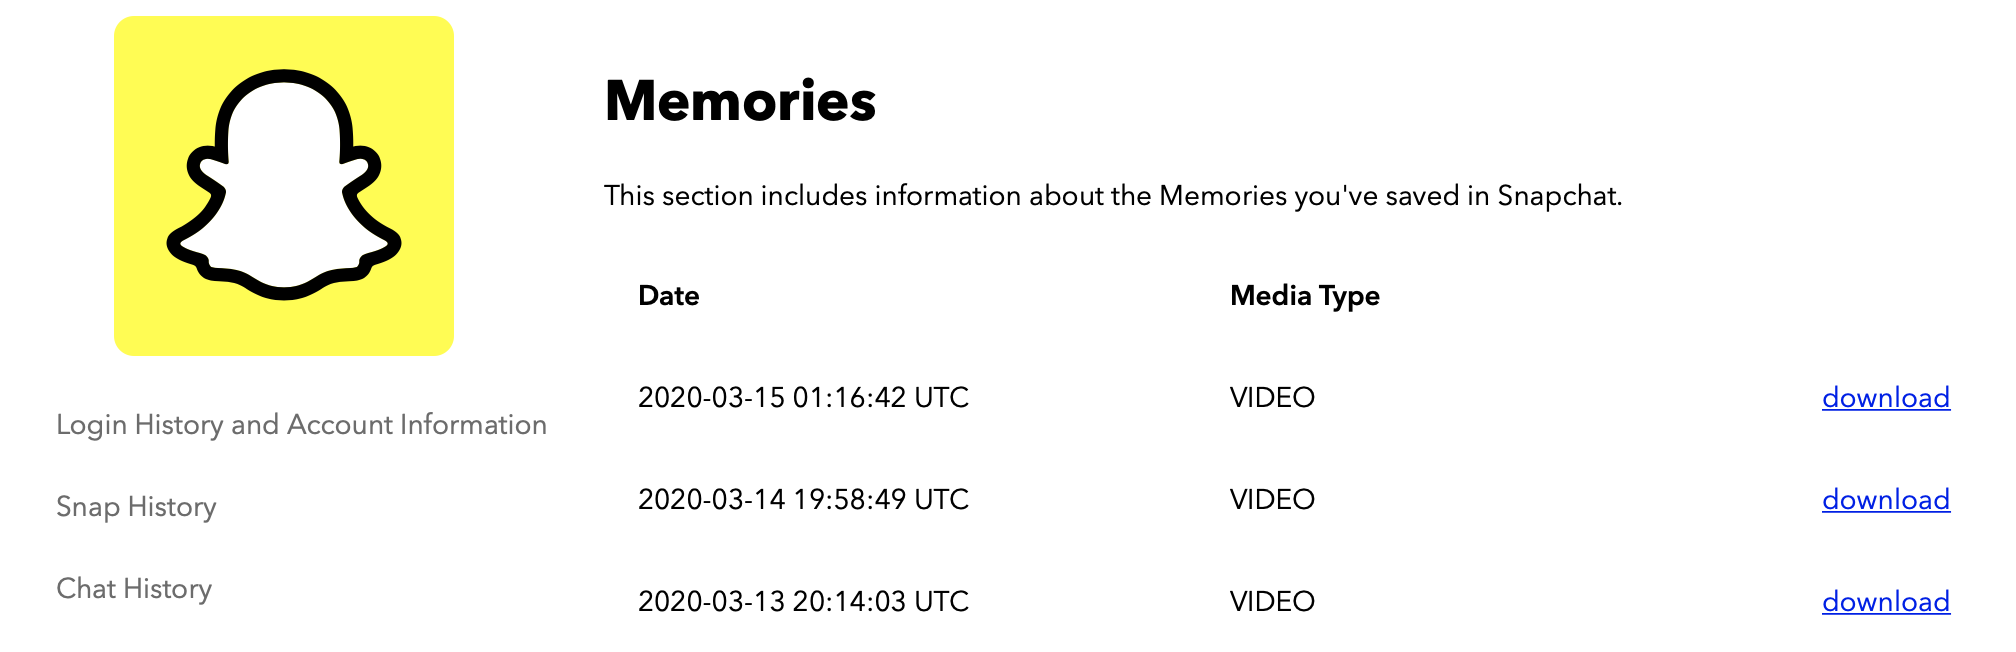 How To Download Snap Memories From Data